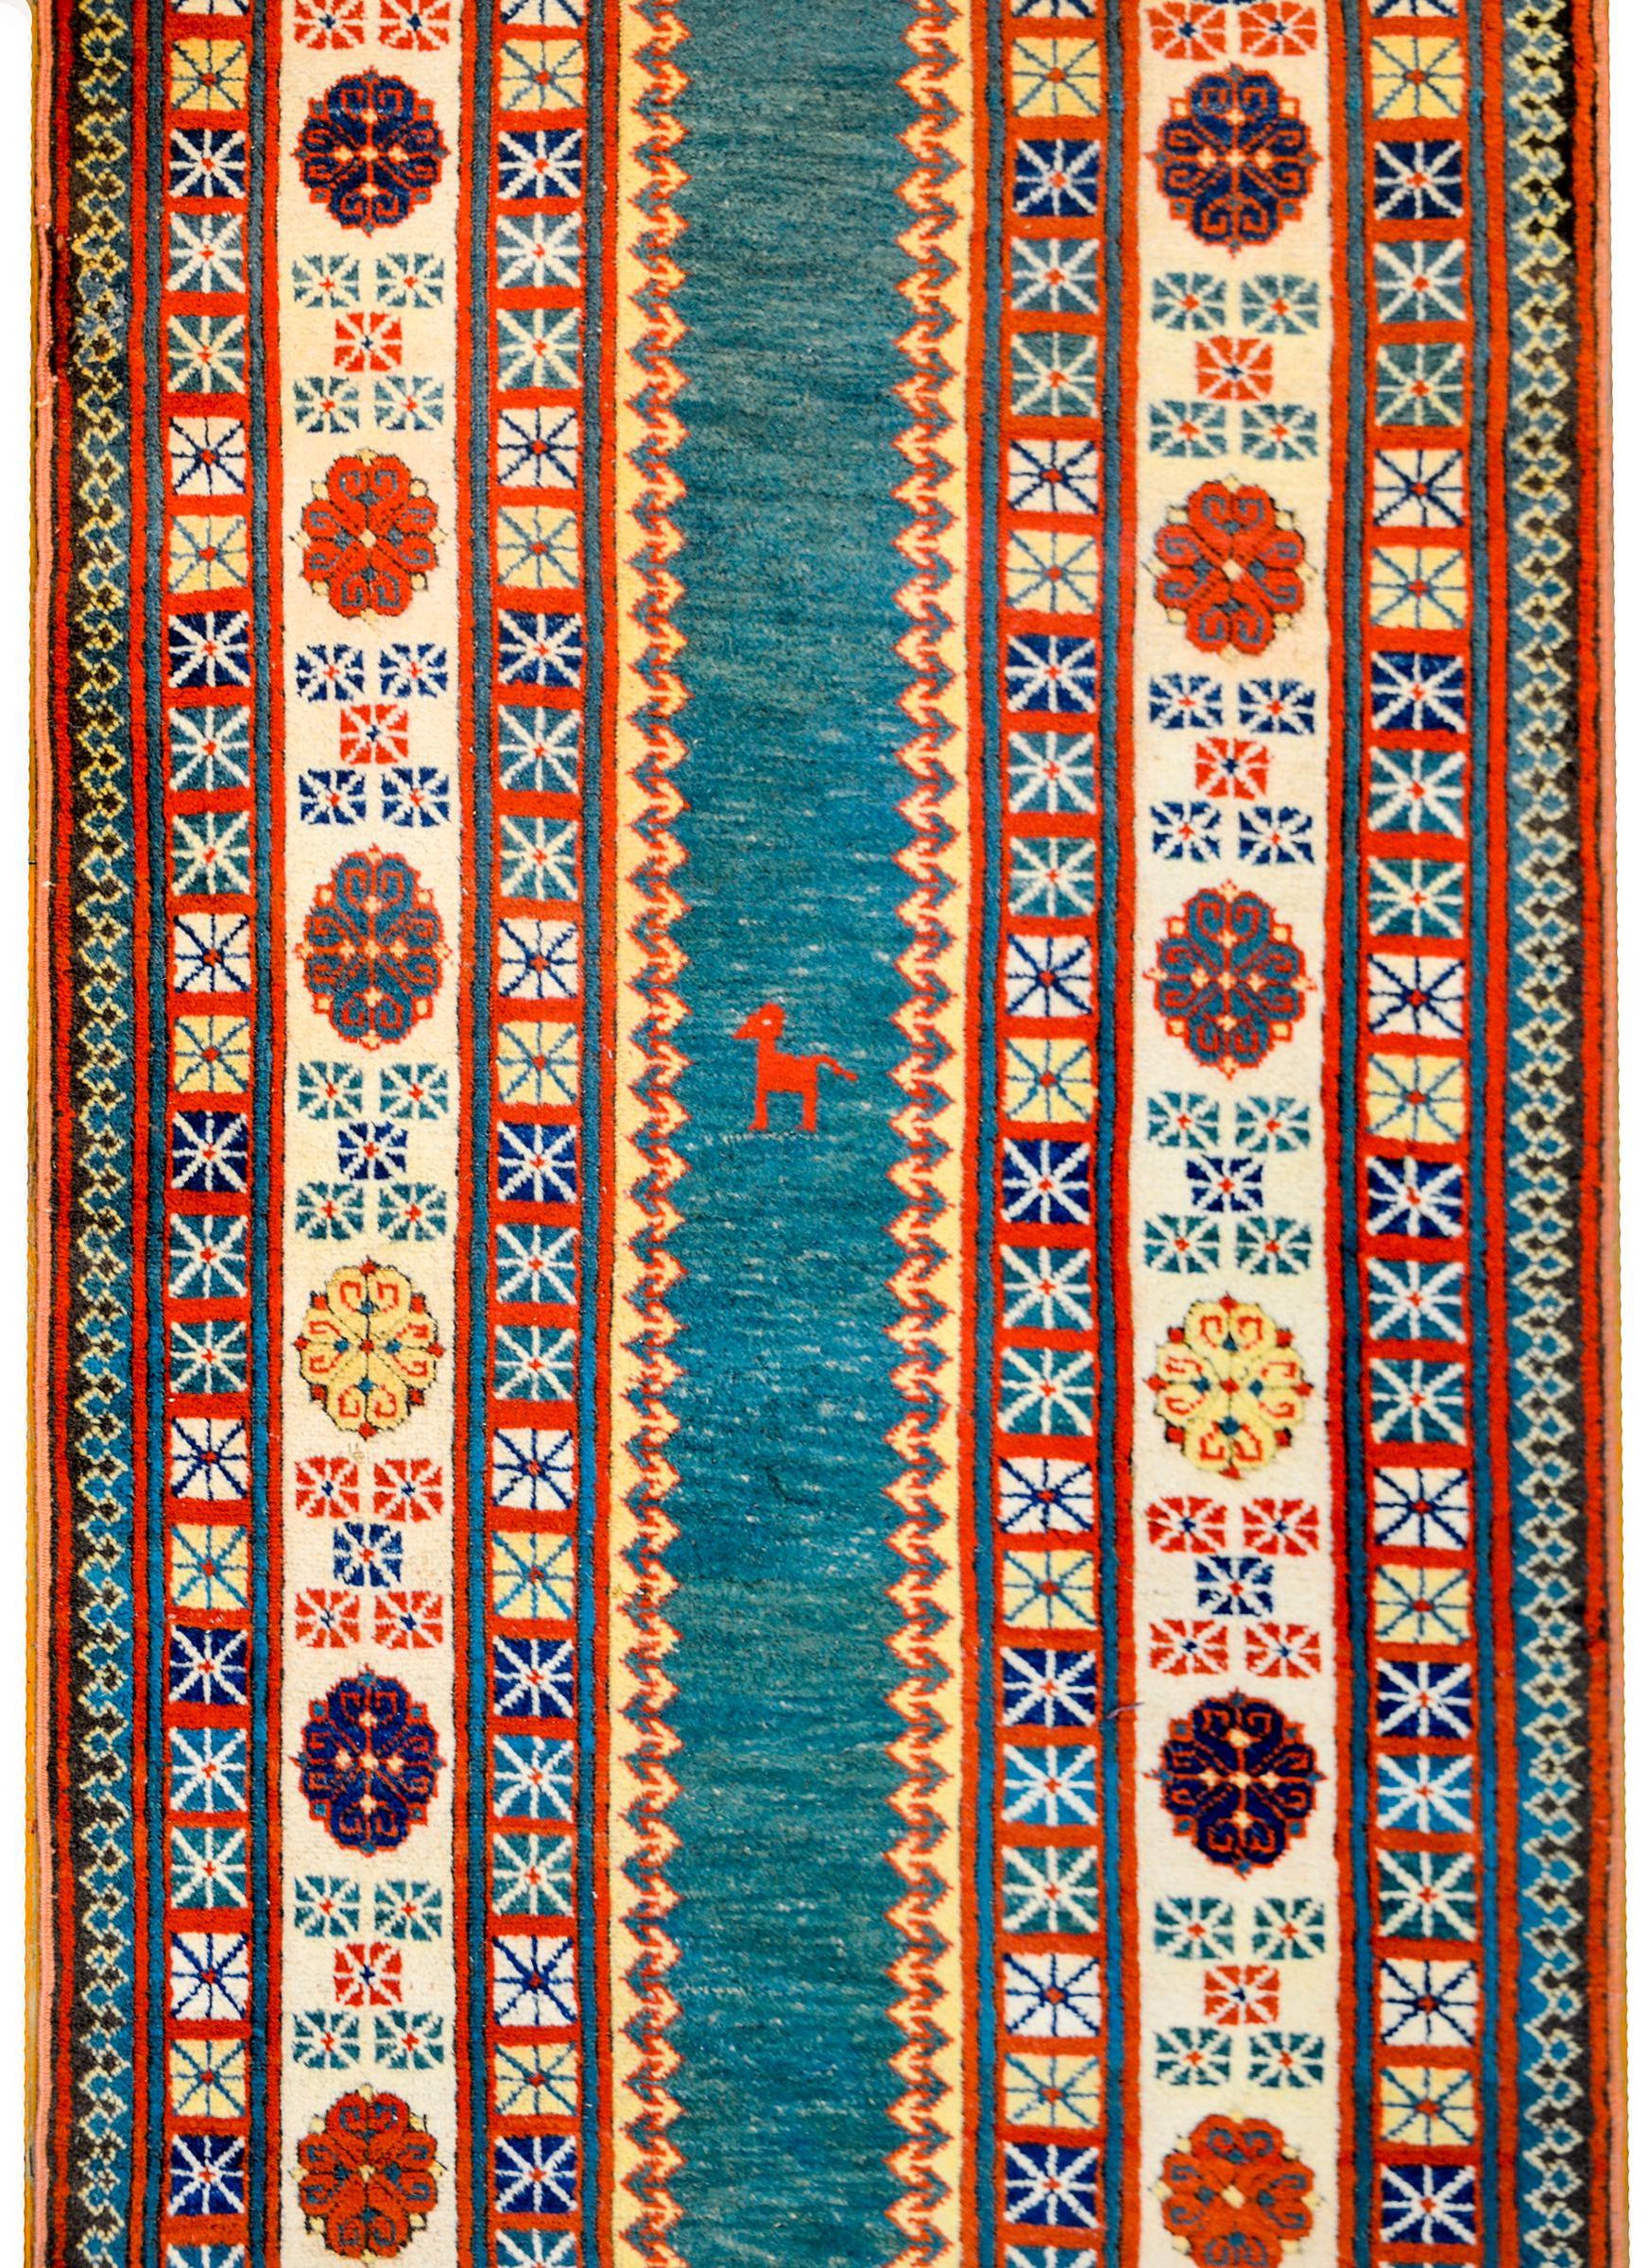 A beautiful 21st century Turkish Talish runner with a narrow indigo central field with a crimson goat in the center. The border is extremely wide with several geometric and stylized floral patterned stripes, all woven in indigo, crimson, yellow, and